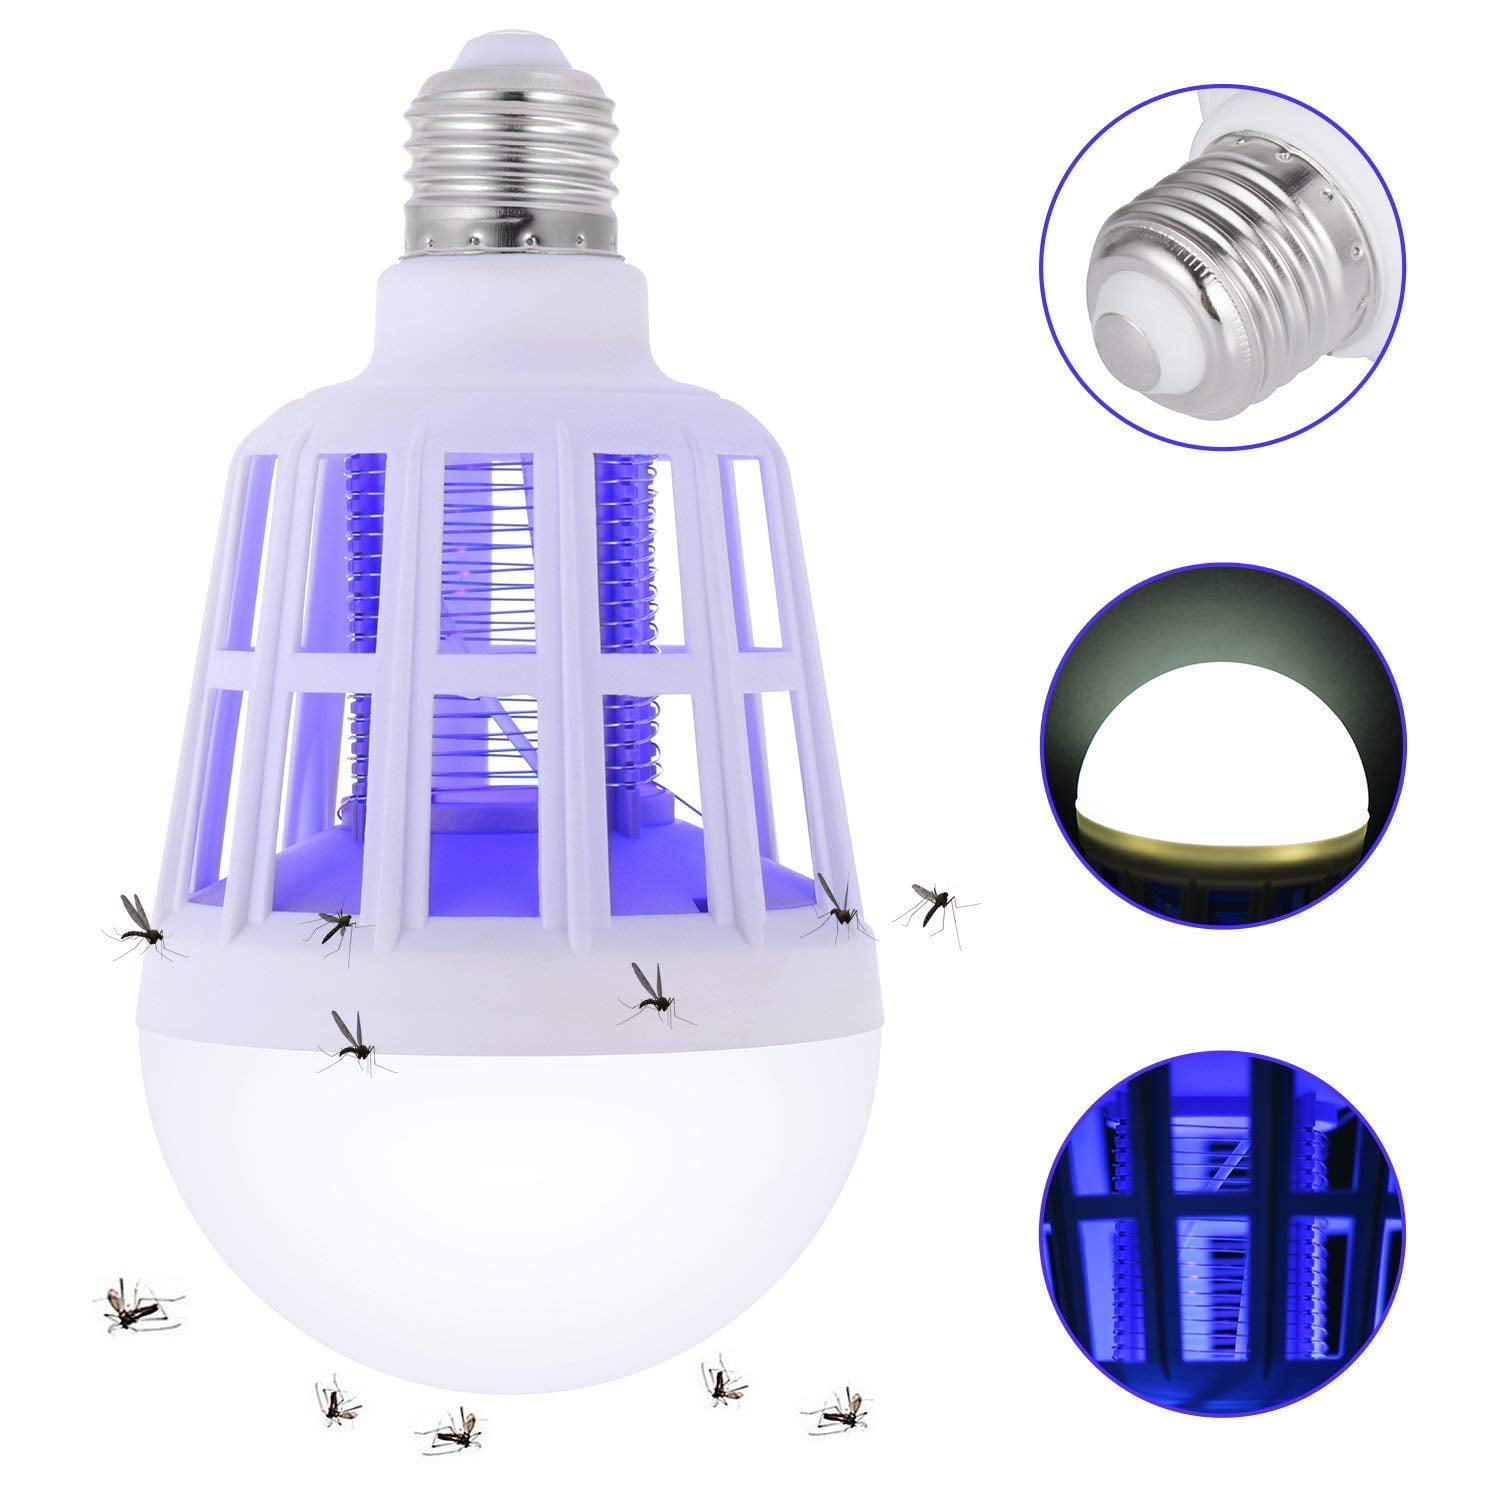 110V Uonlytech 2pcs Bug Zapper Light Bulb UV LED Electronic Mosquito Killer Lamp Insect Zapper Bug Fly Trap for Outdoor Porch Patio Backyard Bedroom